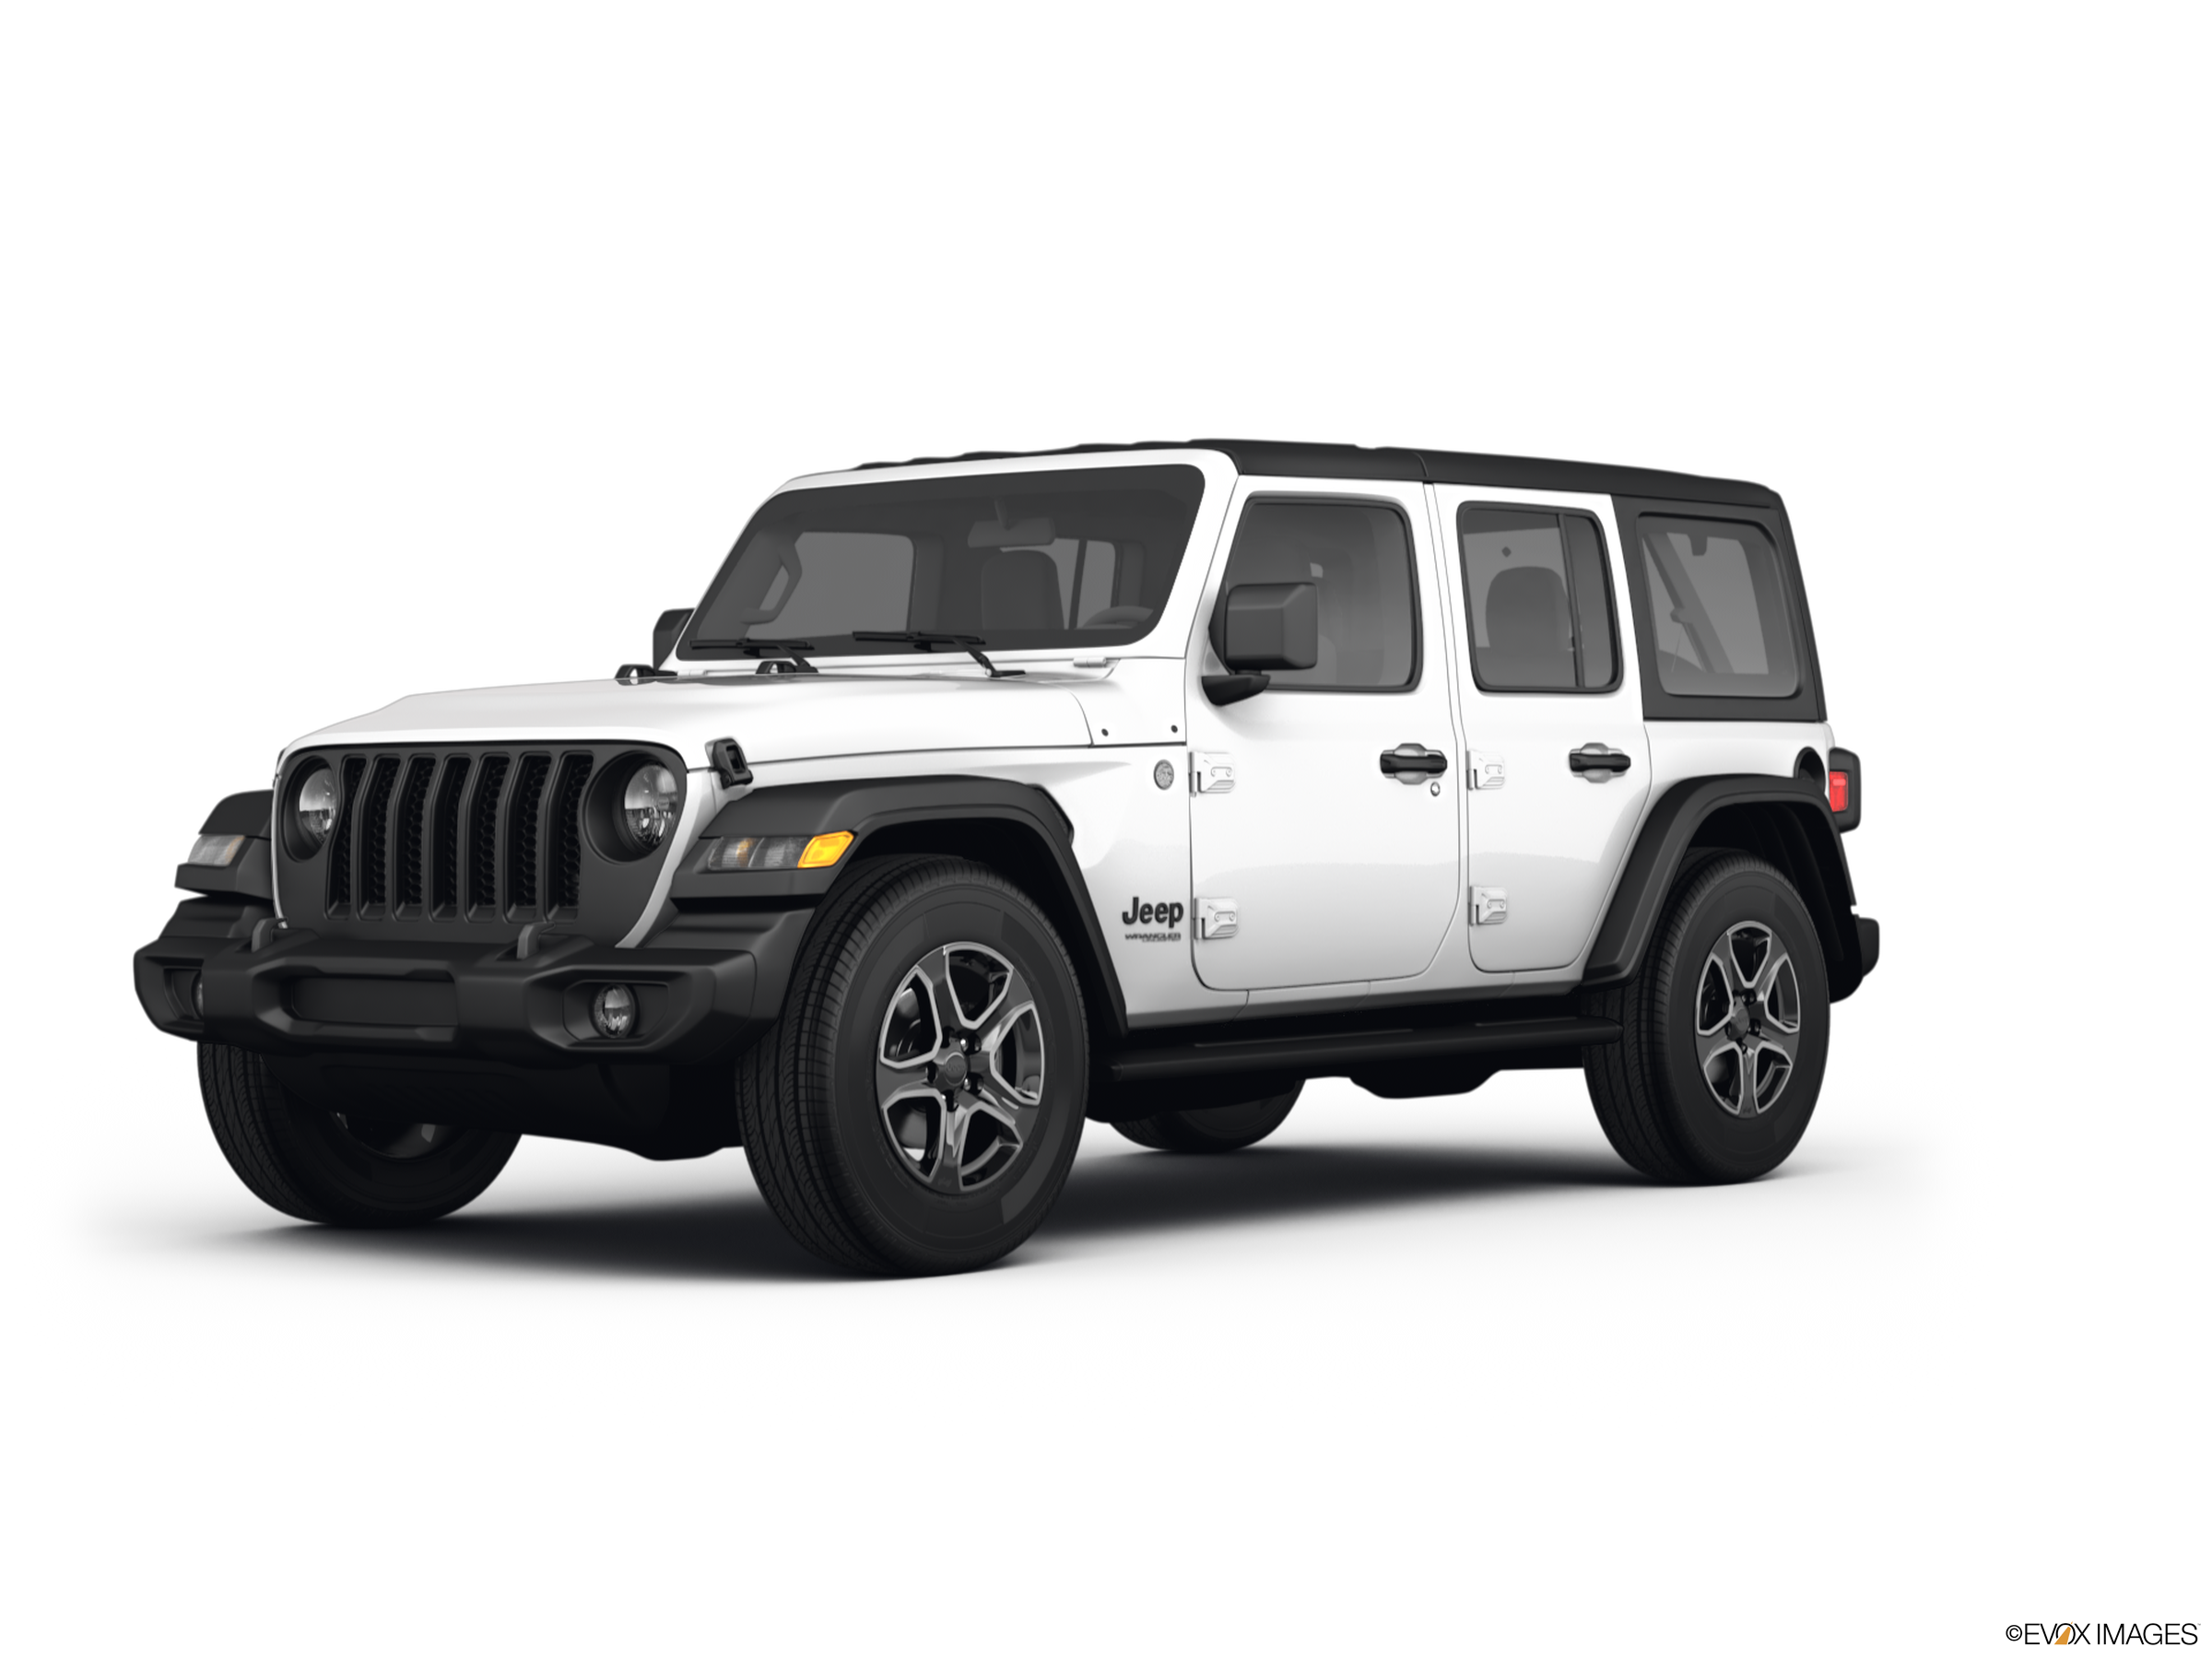 New 2022 Jeep Wrangler Unlimited Sahara Altitude Prices | Kelley Blue Book